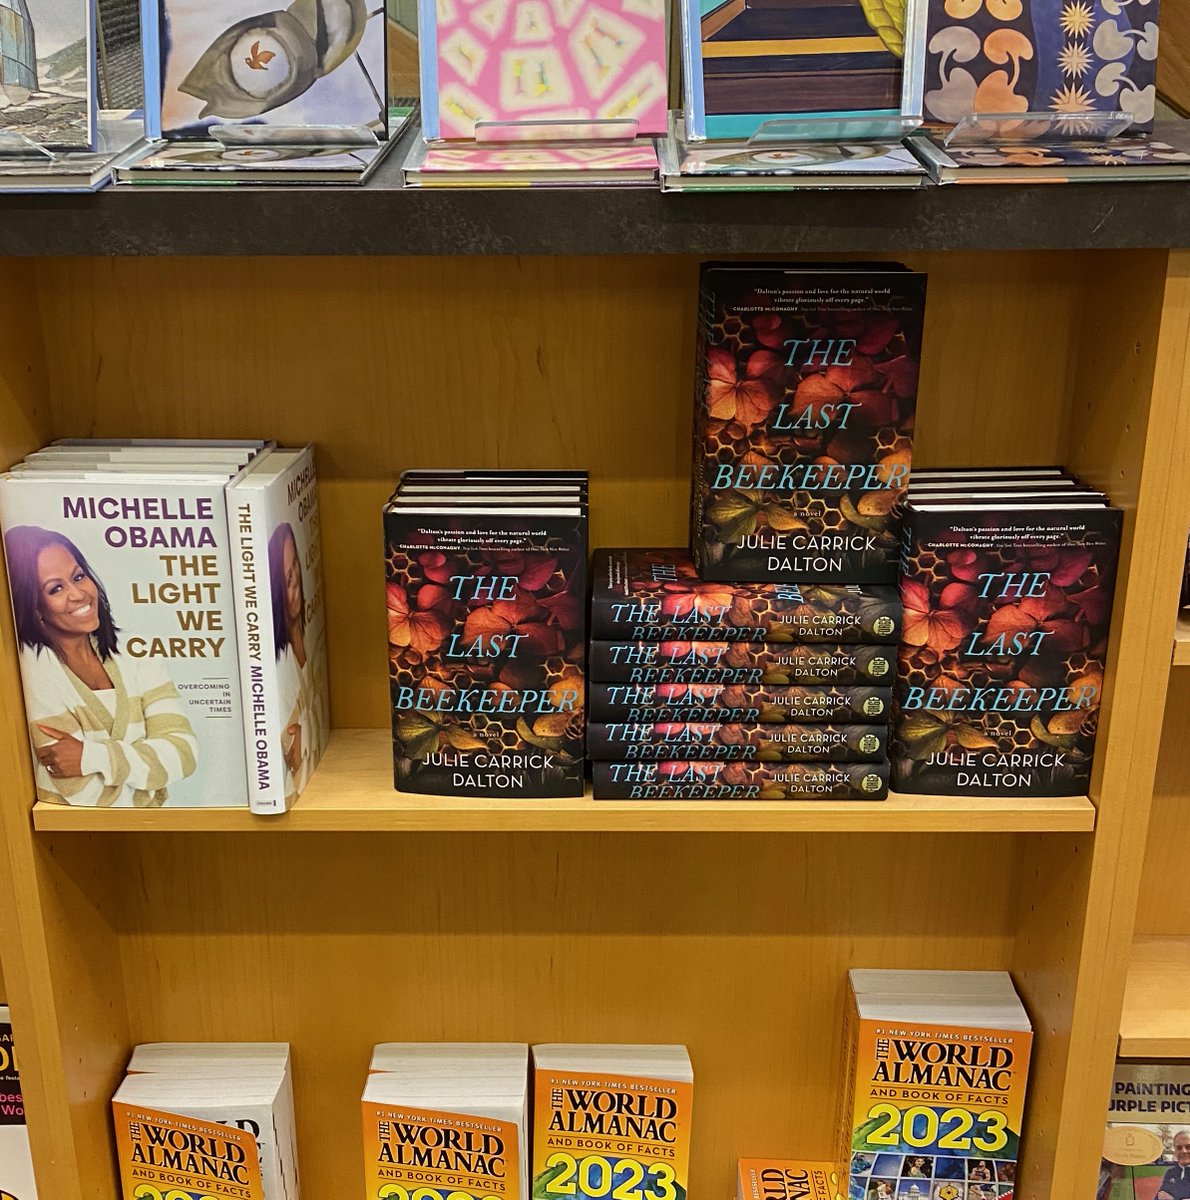 Thank you @ubookstoresea for hosting my launch of THE LAST BEEKEEPER last night. And huge thanks to my conversation partner @KelliEstes for her insightful questions. A fantastic evening! Now, onward to #AWP2023! #TheLastBeekeeper @TallPoppyWriter